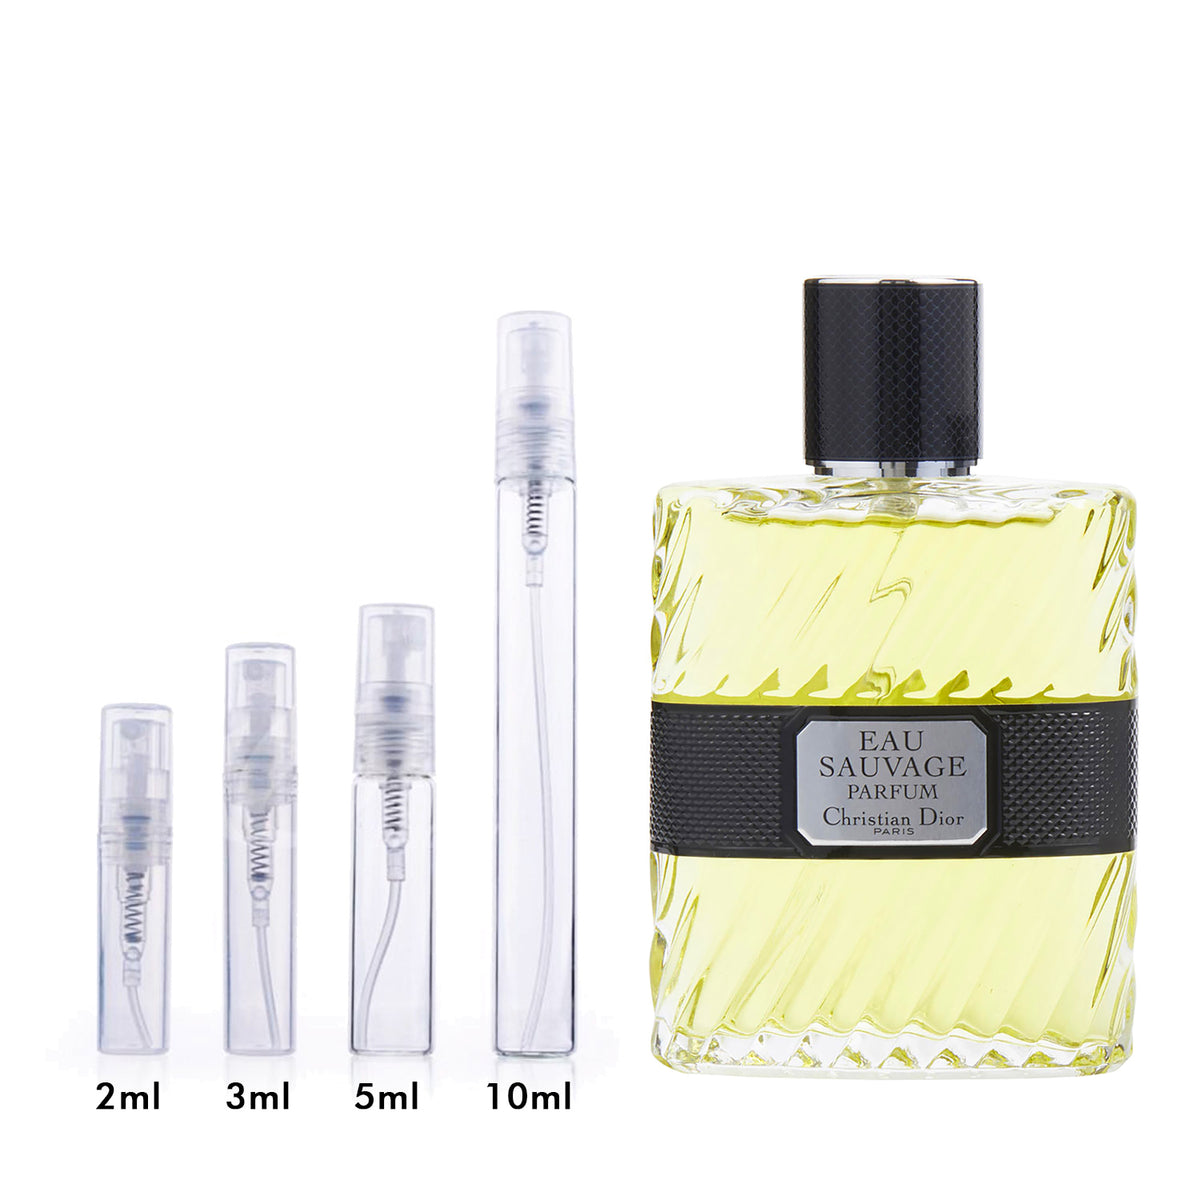 Eau Sauvage Extreme Intense 2010 by Dior Fragrance Samples, DecantX